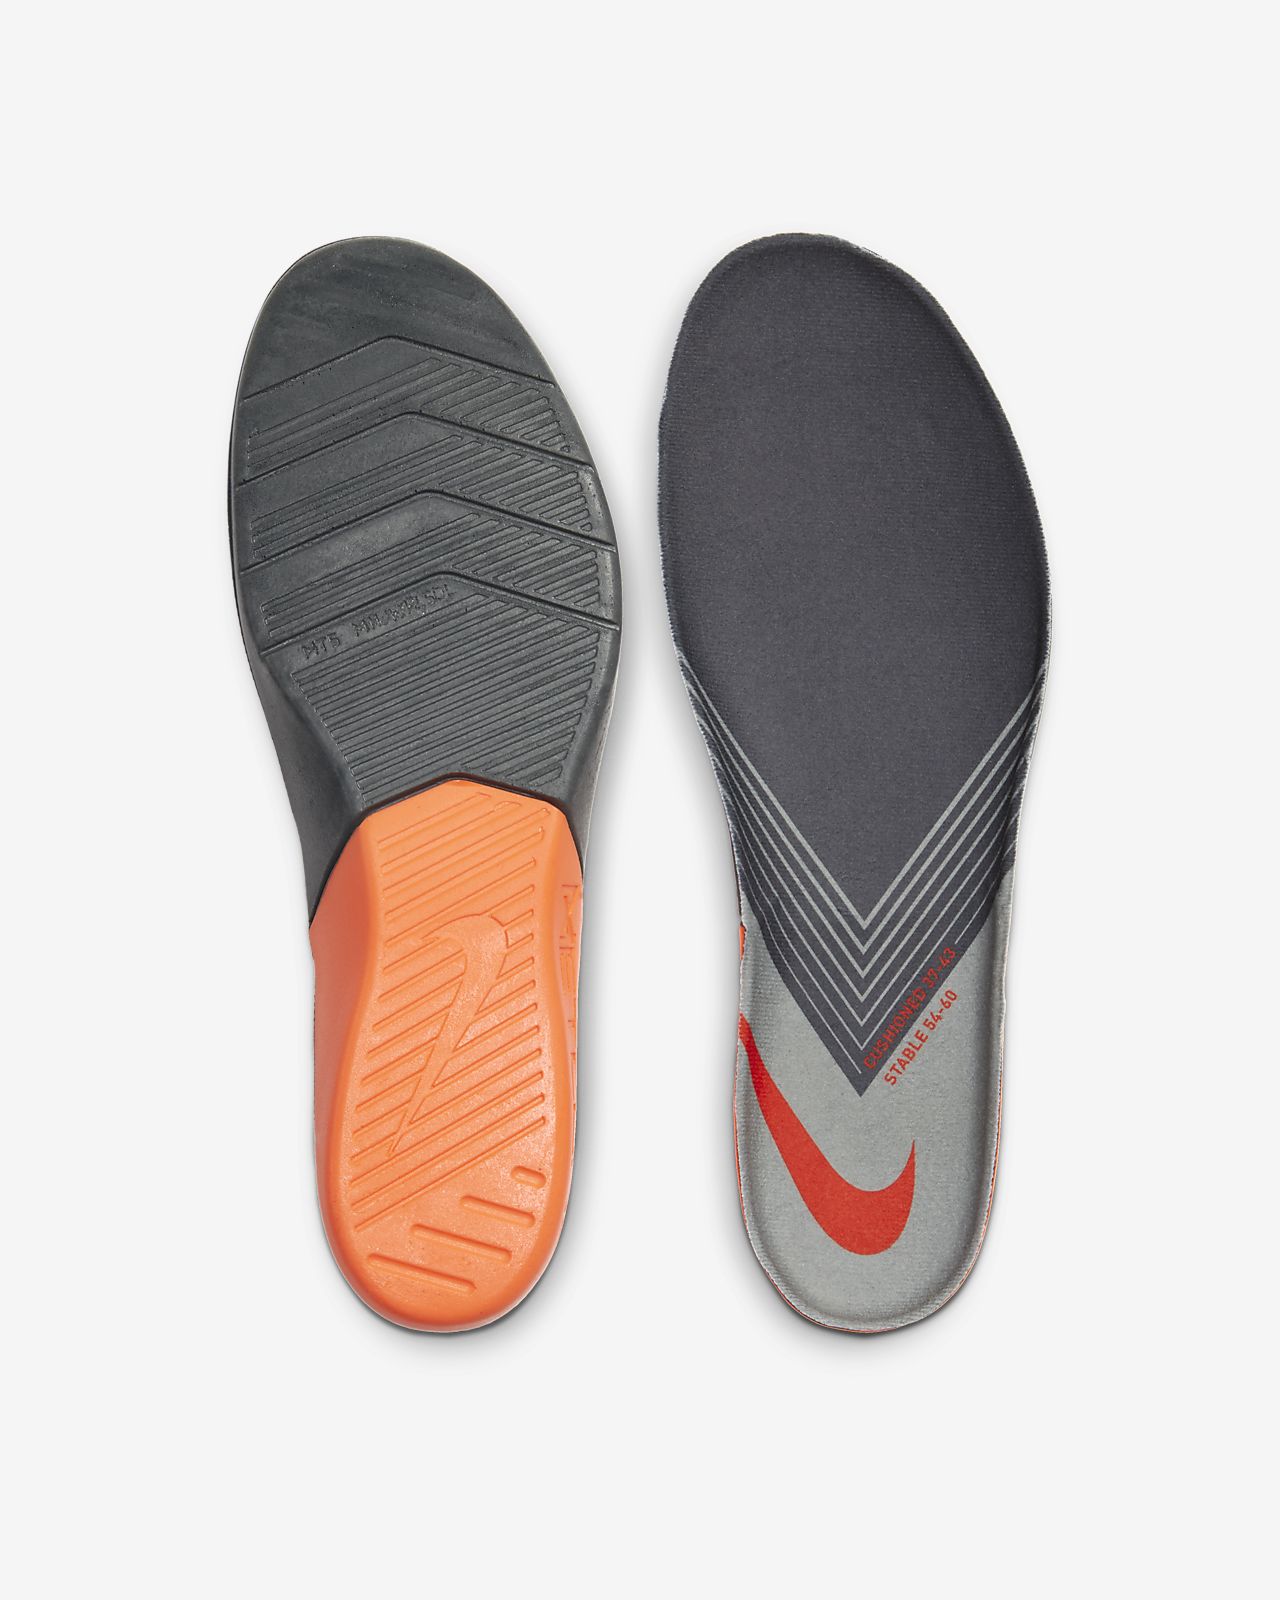 nike metcon insoles